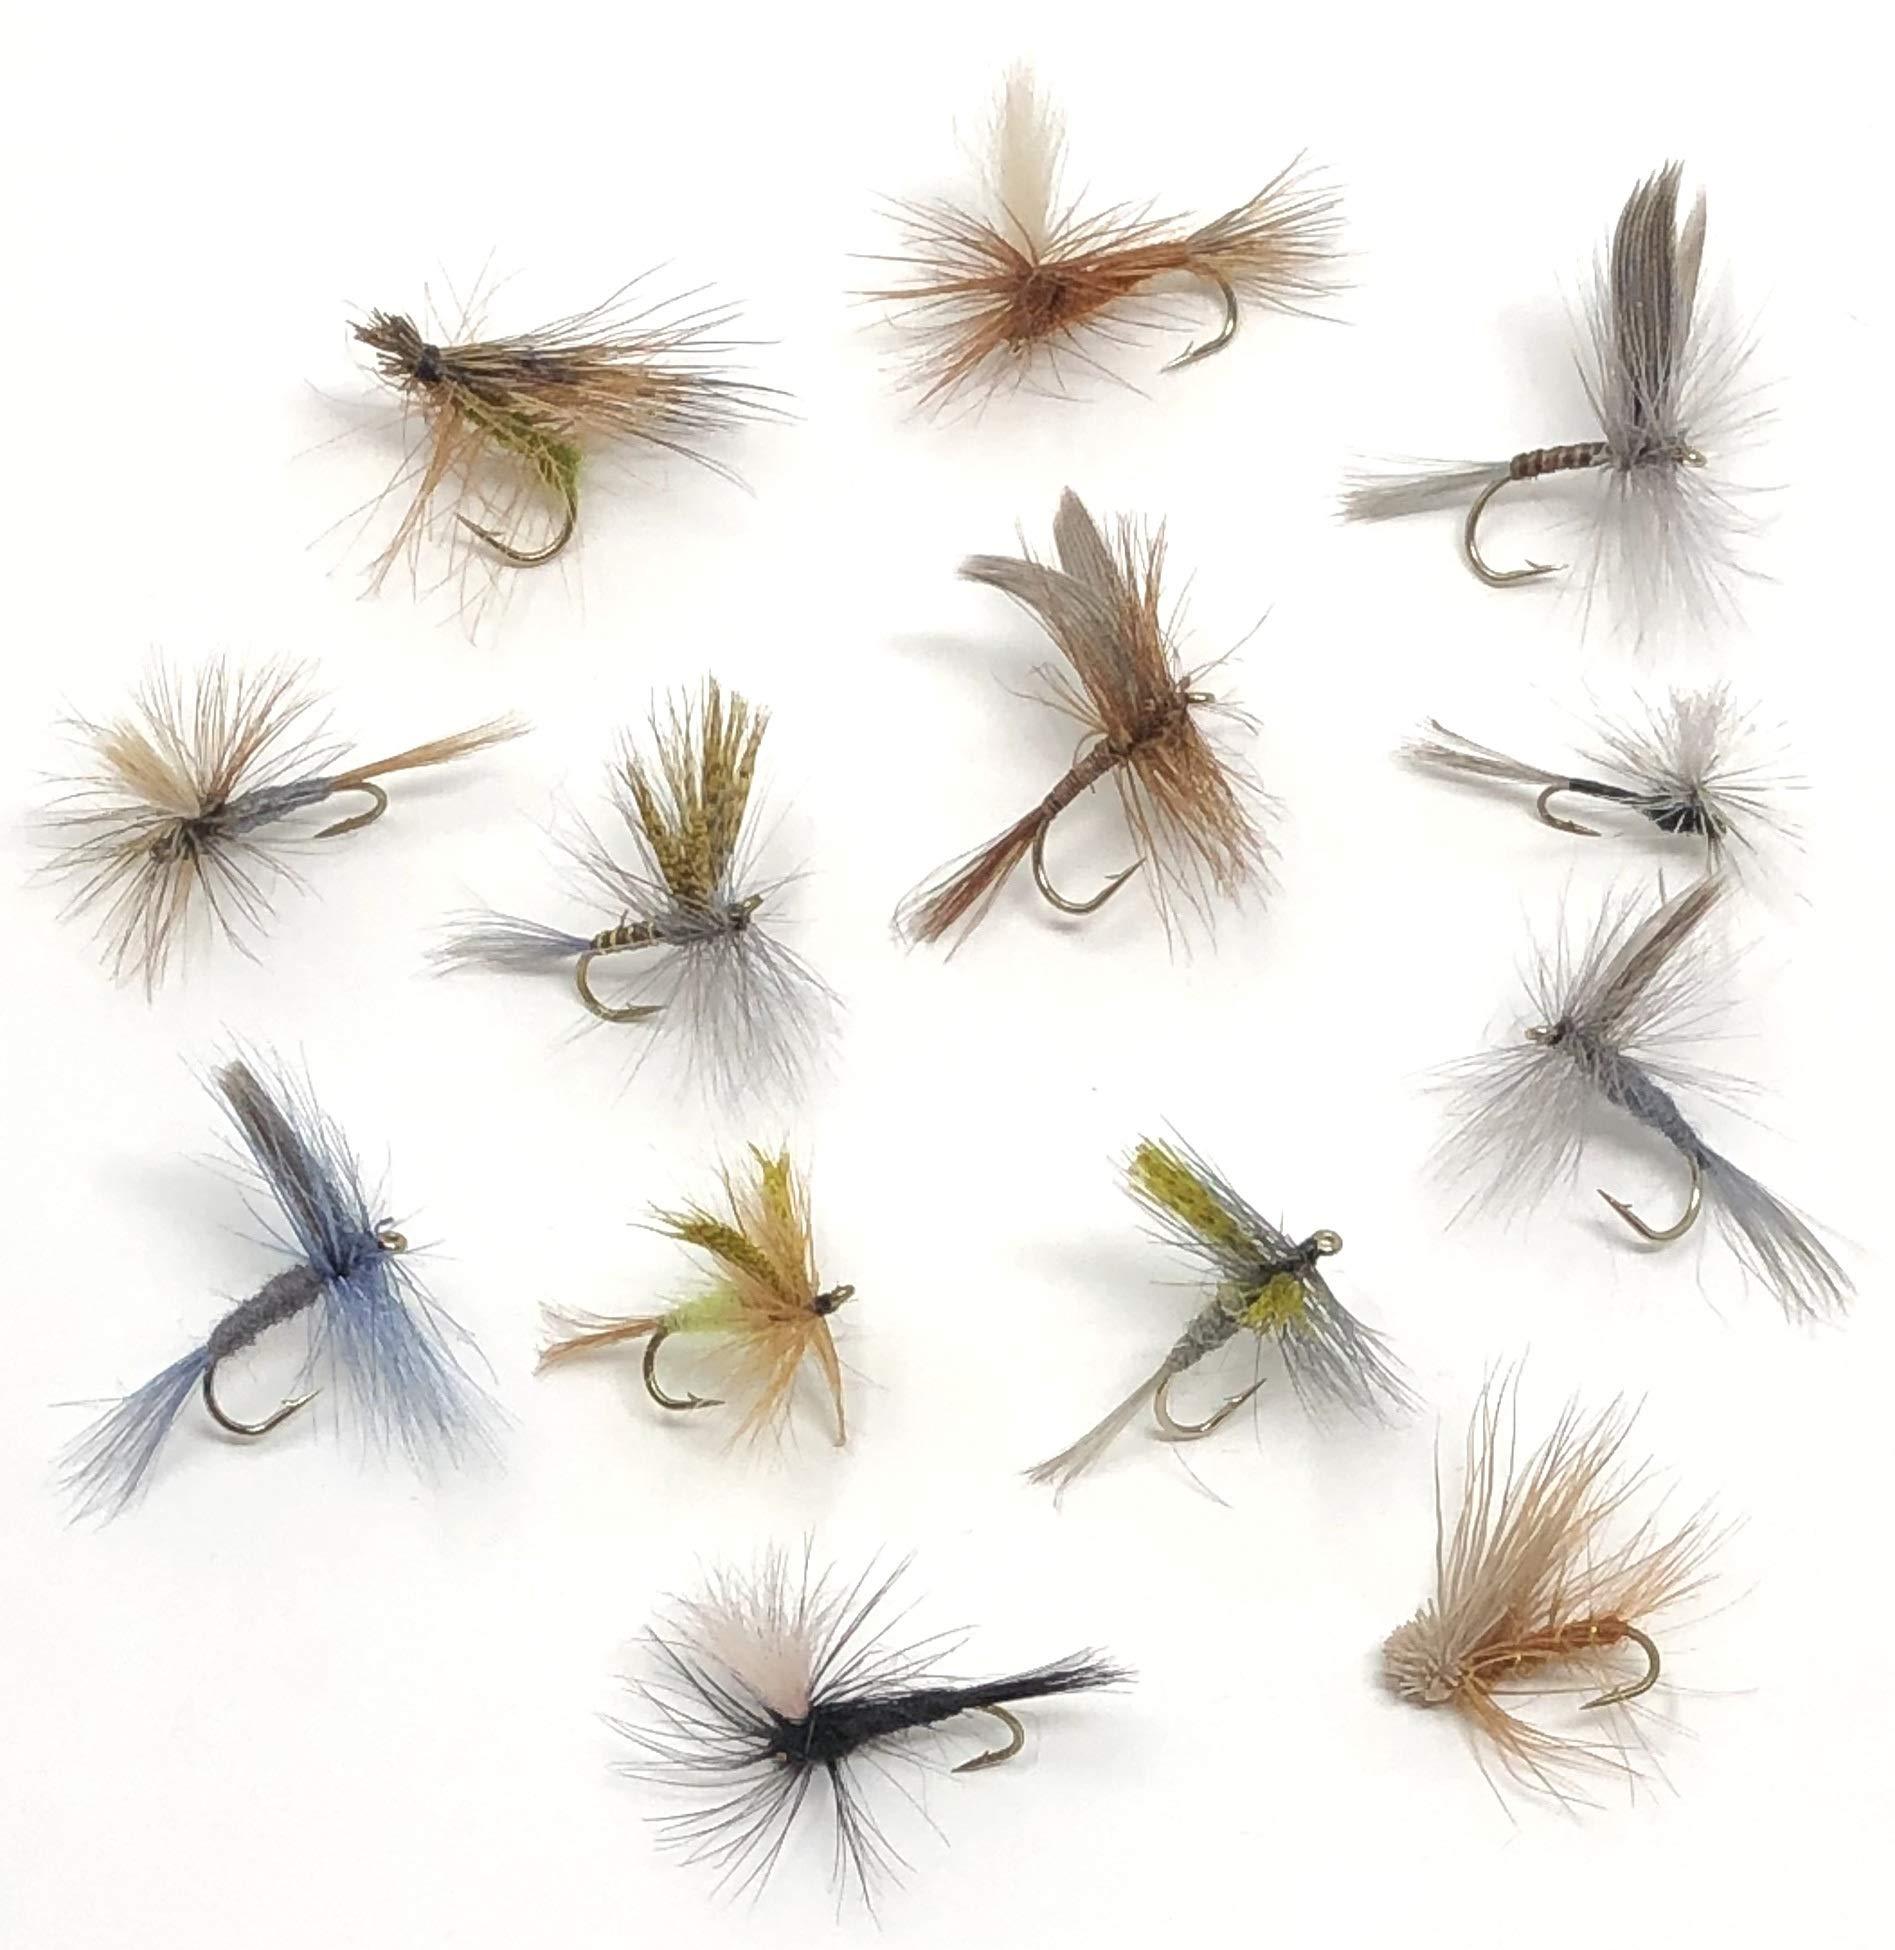 Fly Fishing Flies Assortment, Trout Fly Bait, 36 Dry Flies